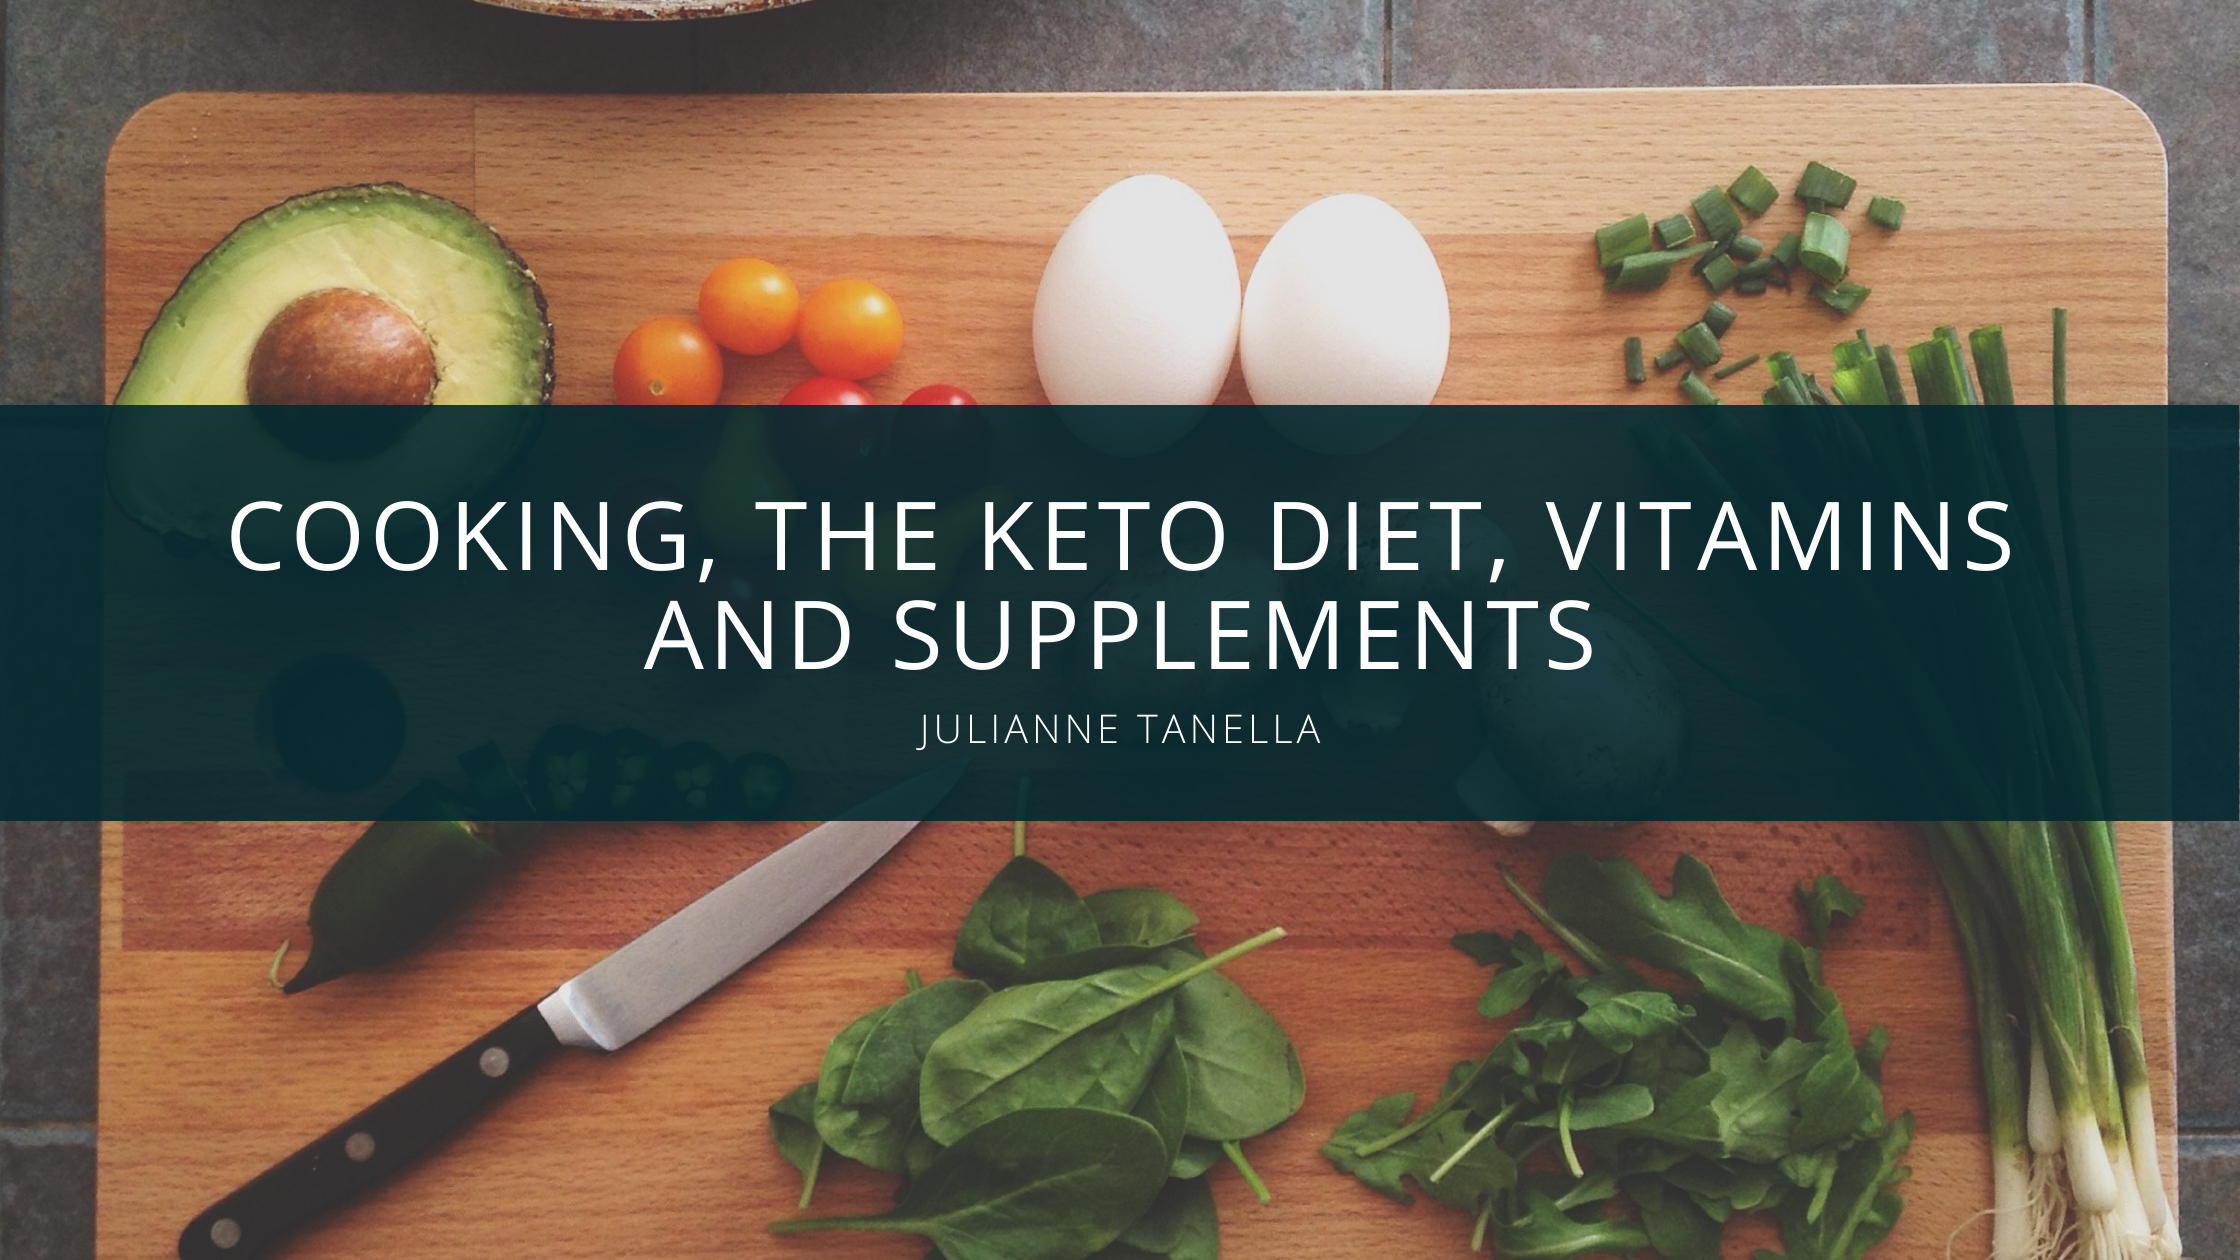 Julianne Tanella: On Cooking, The KETO Diet, Vitamins and Supplements